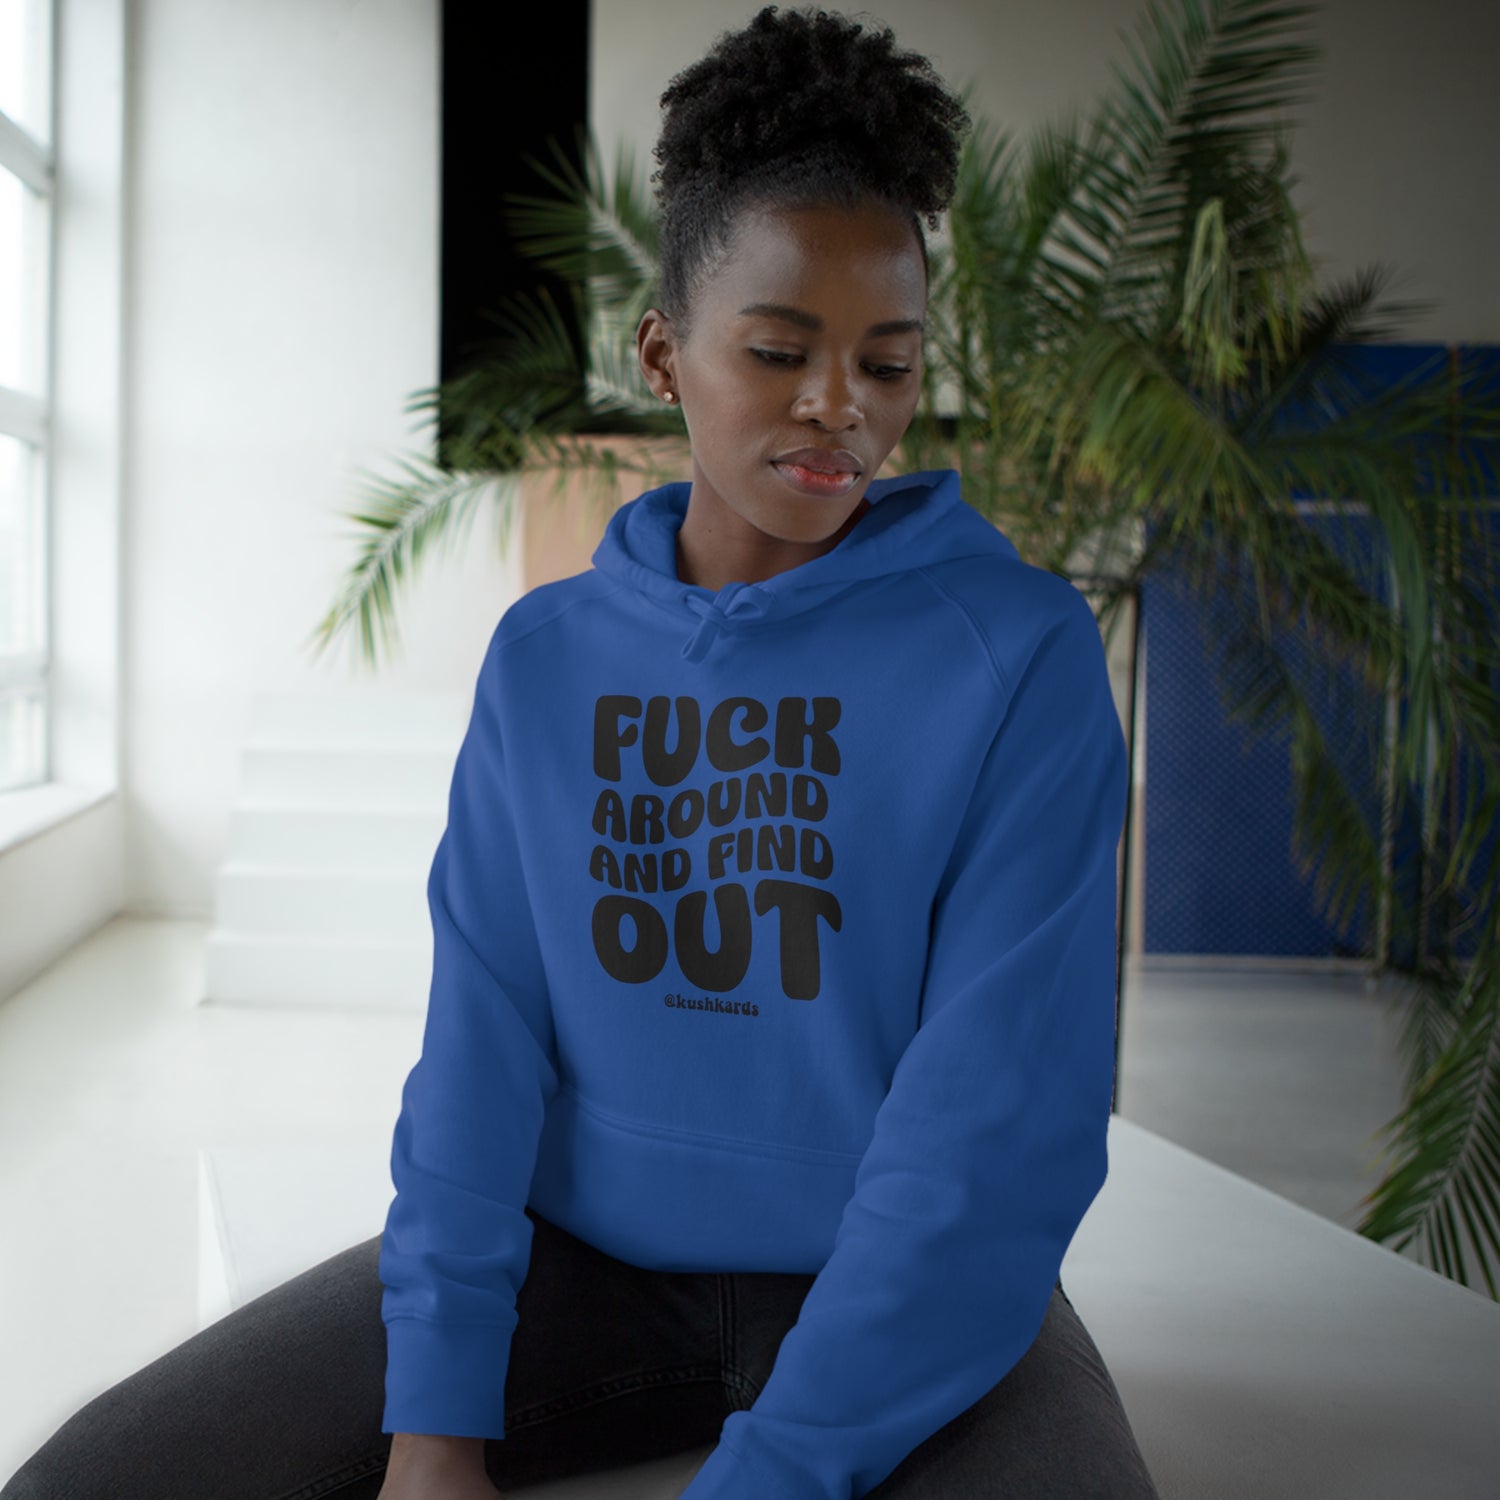 Fuck Around And Find Out Statement Hoodie